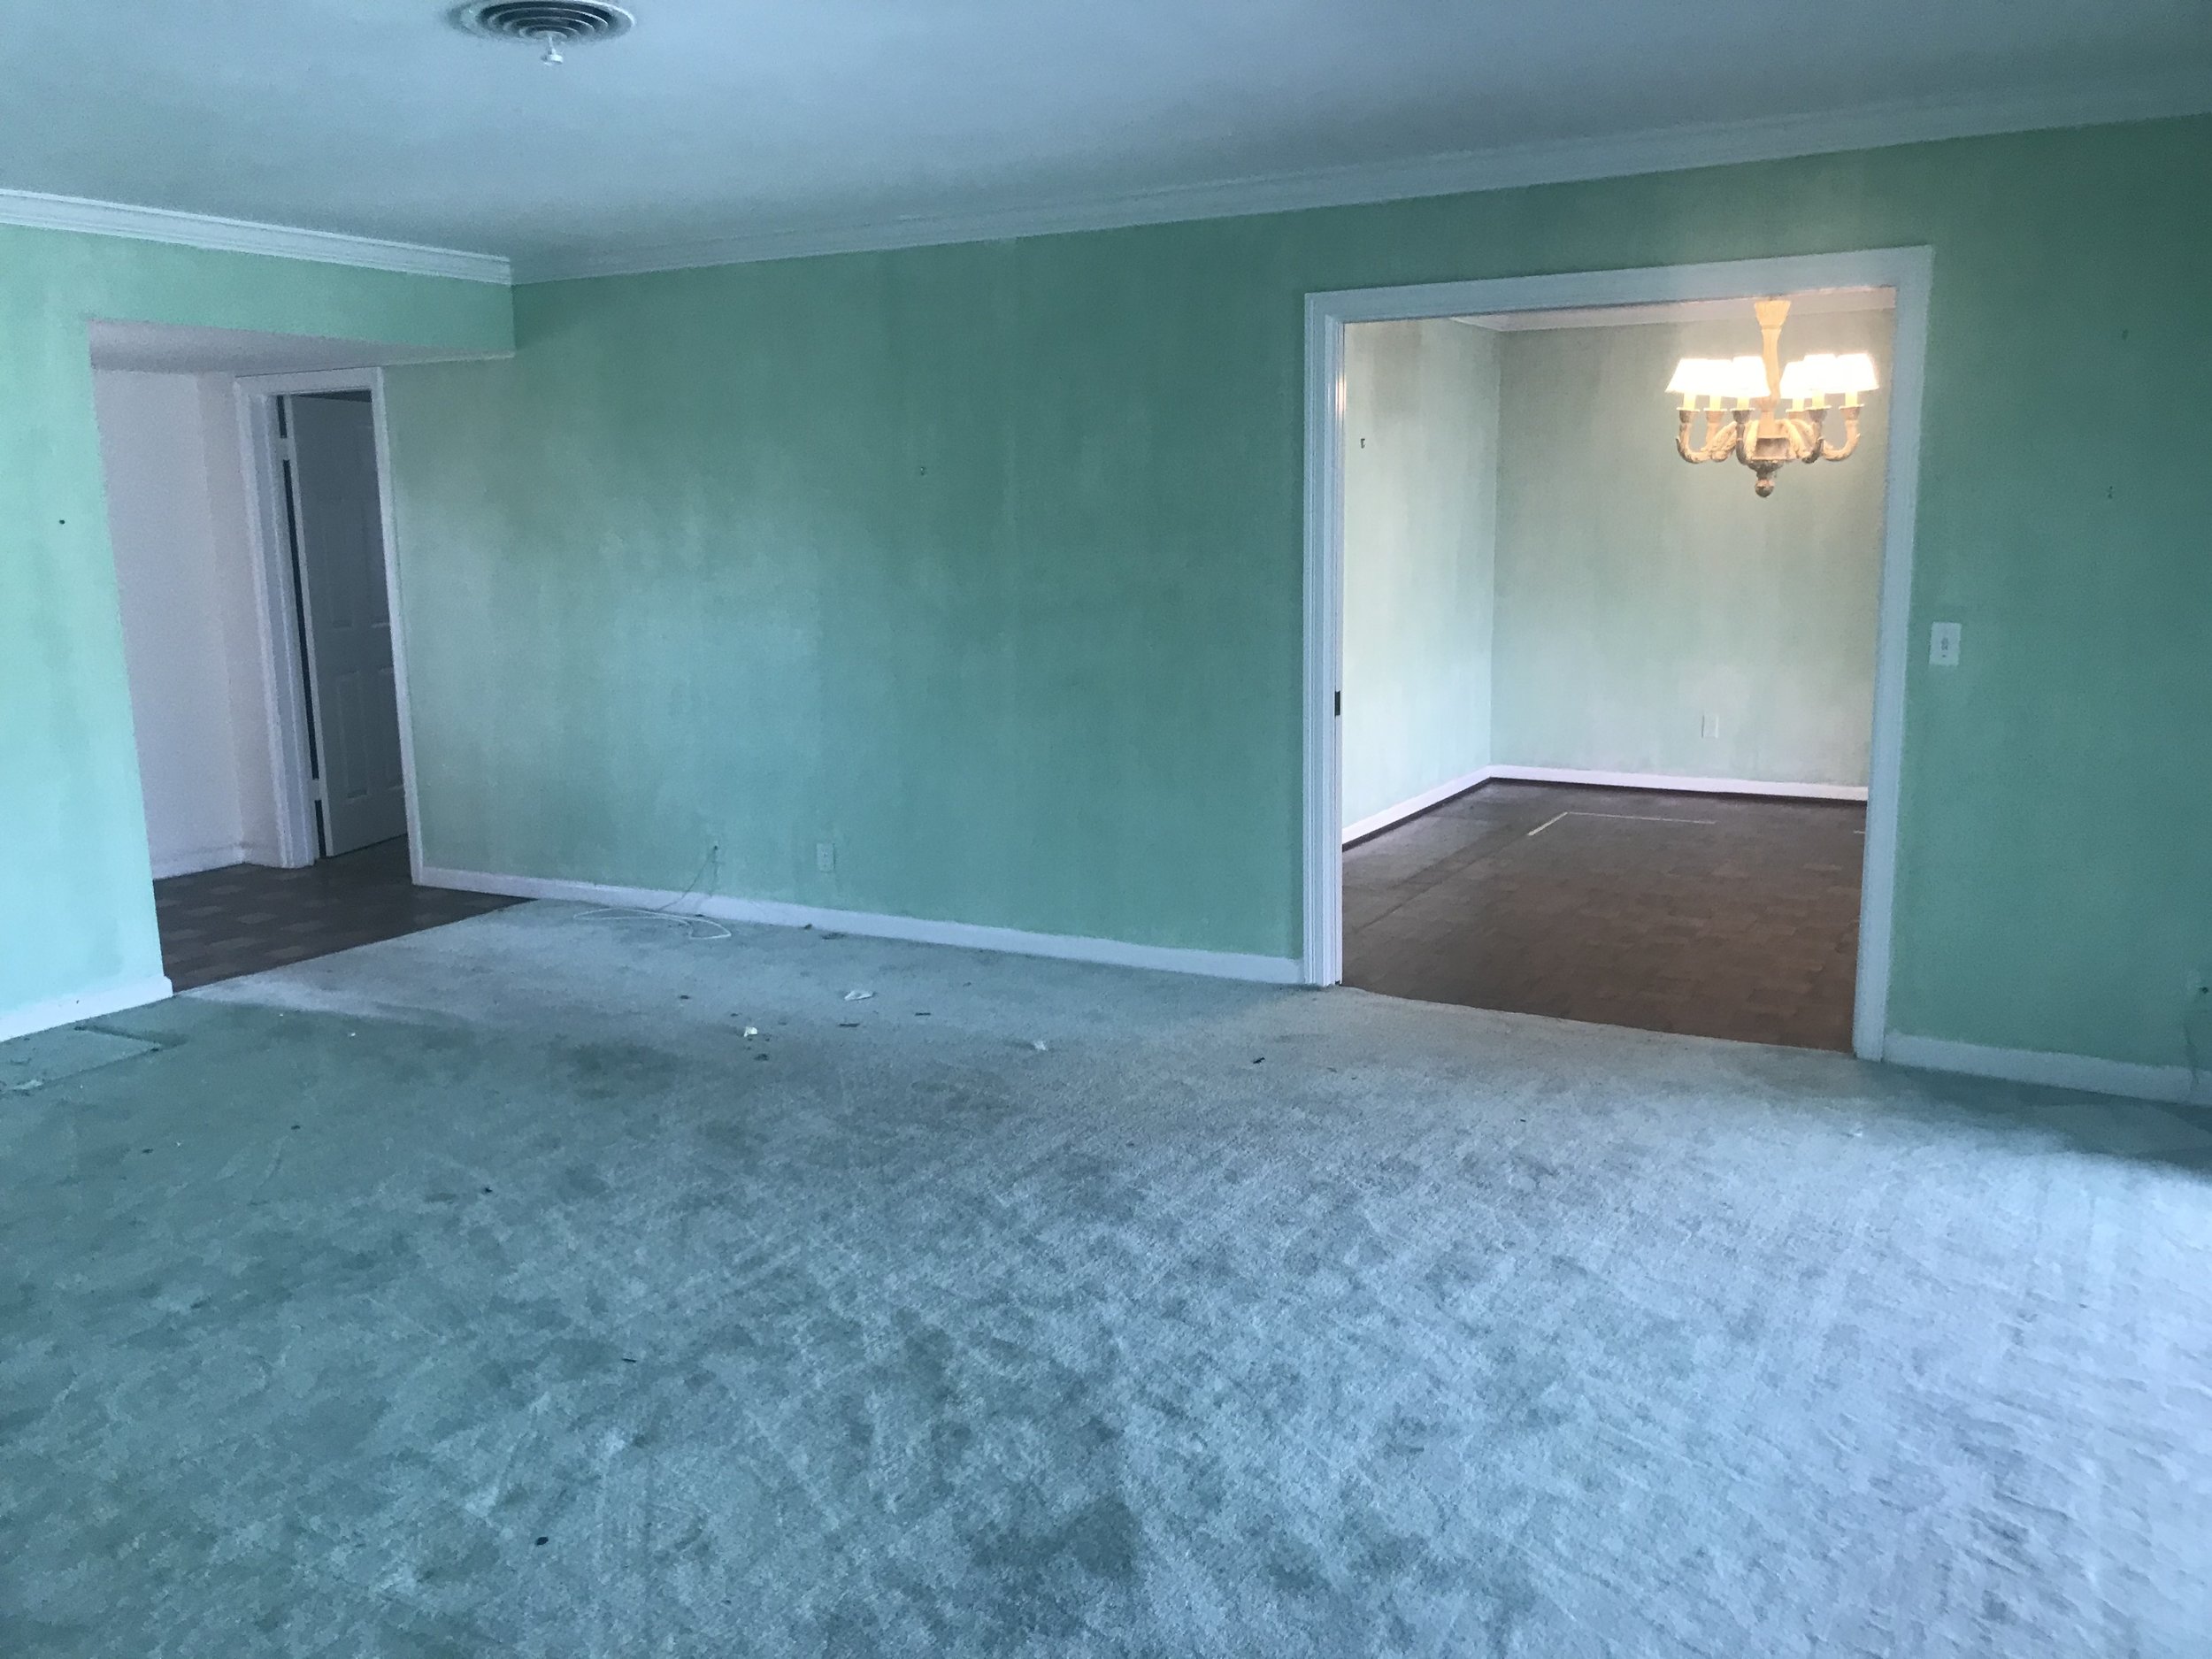 This view is standing in the doorway of the master suite and looking into the formal living area and current dining room space. This wall will be coming out as well as the left wall of the dining room.